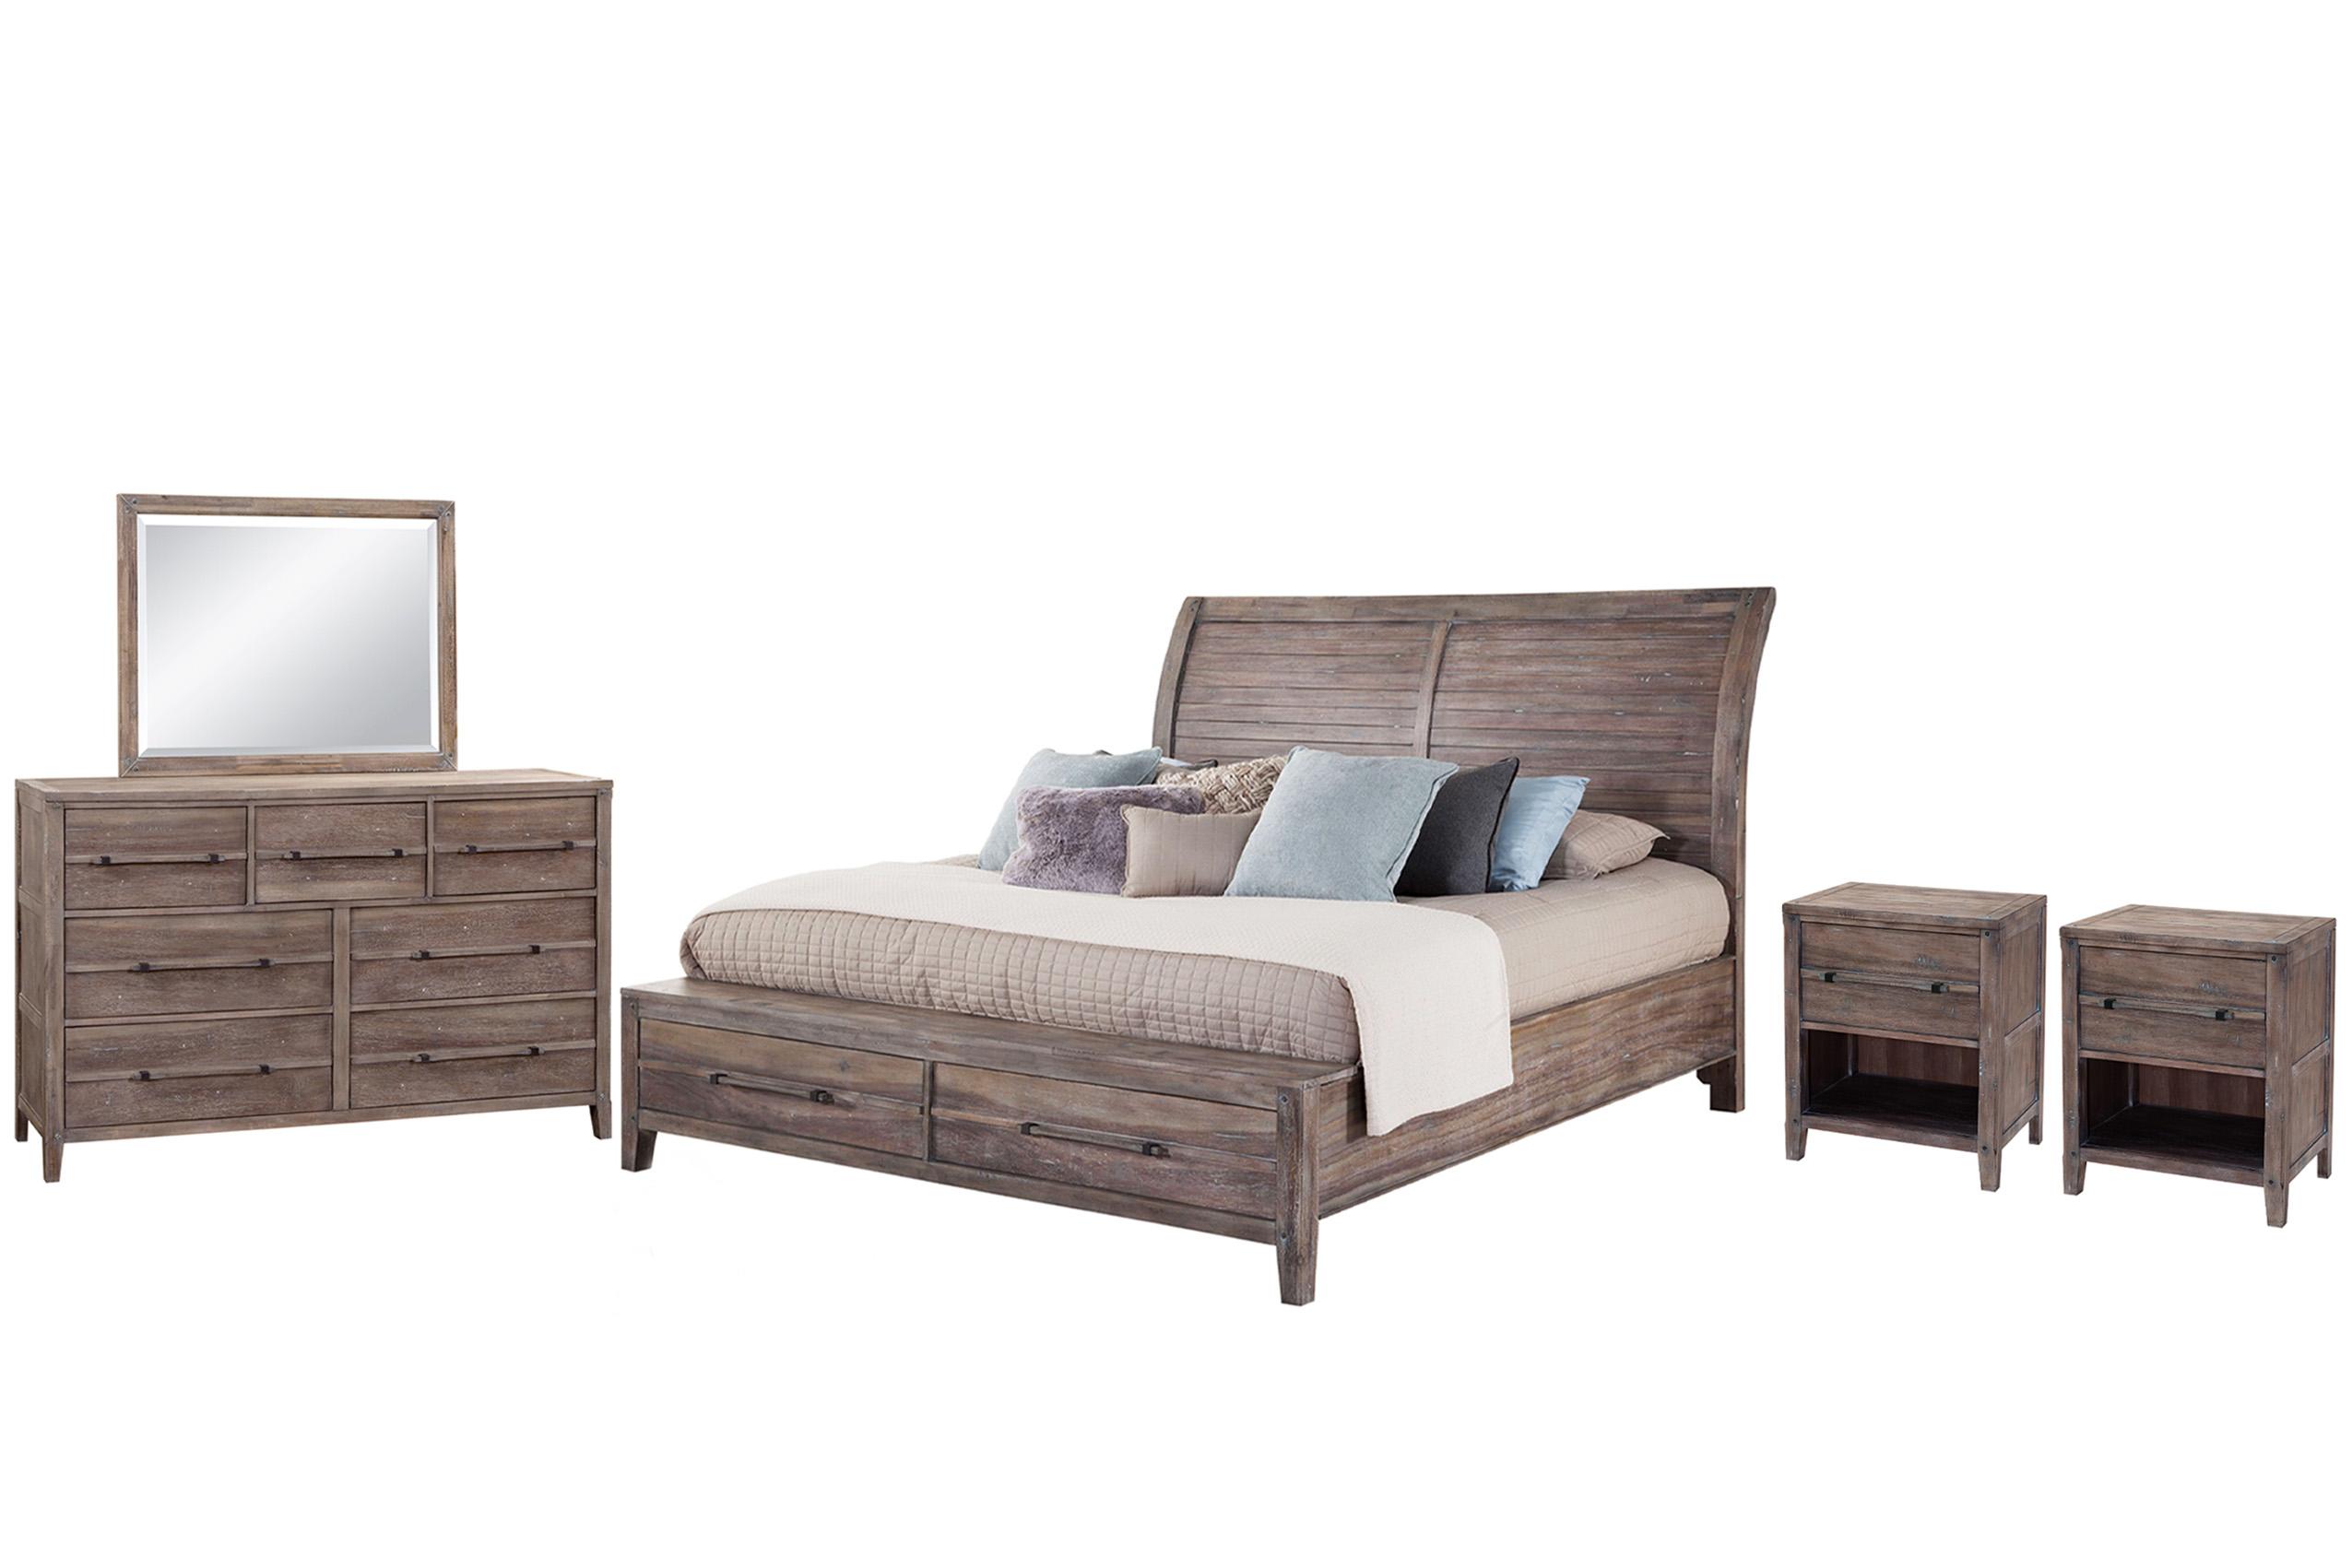 Classic, Traditional Sleigh Bedroom Set AURORA 2800-50SLES 2800-50SLES-2NDM-5PC in Driftwood, Gray 